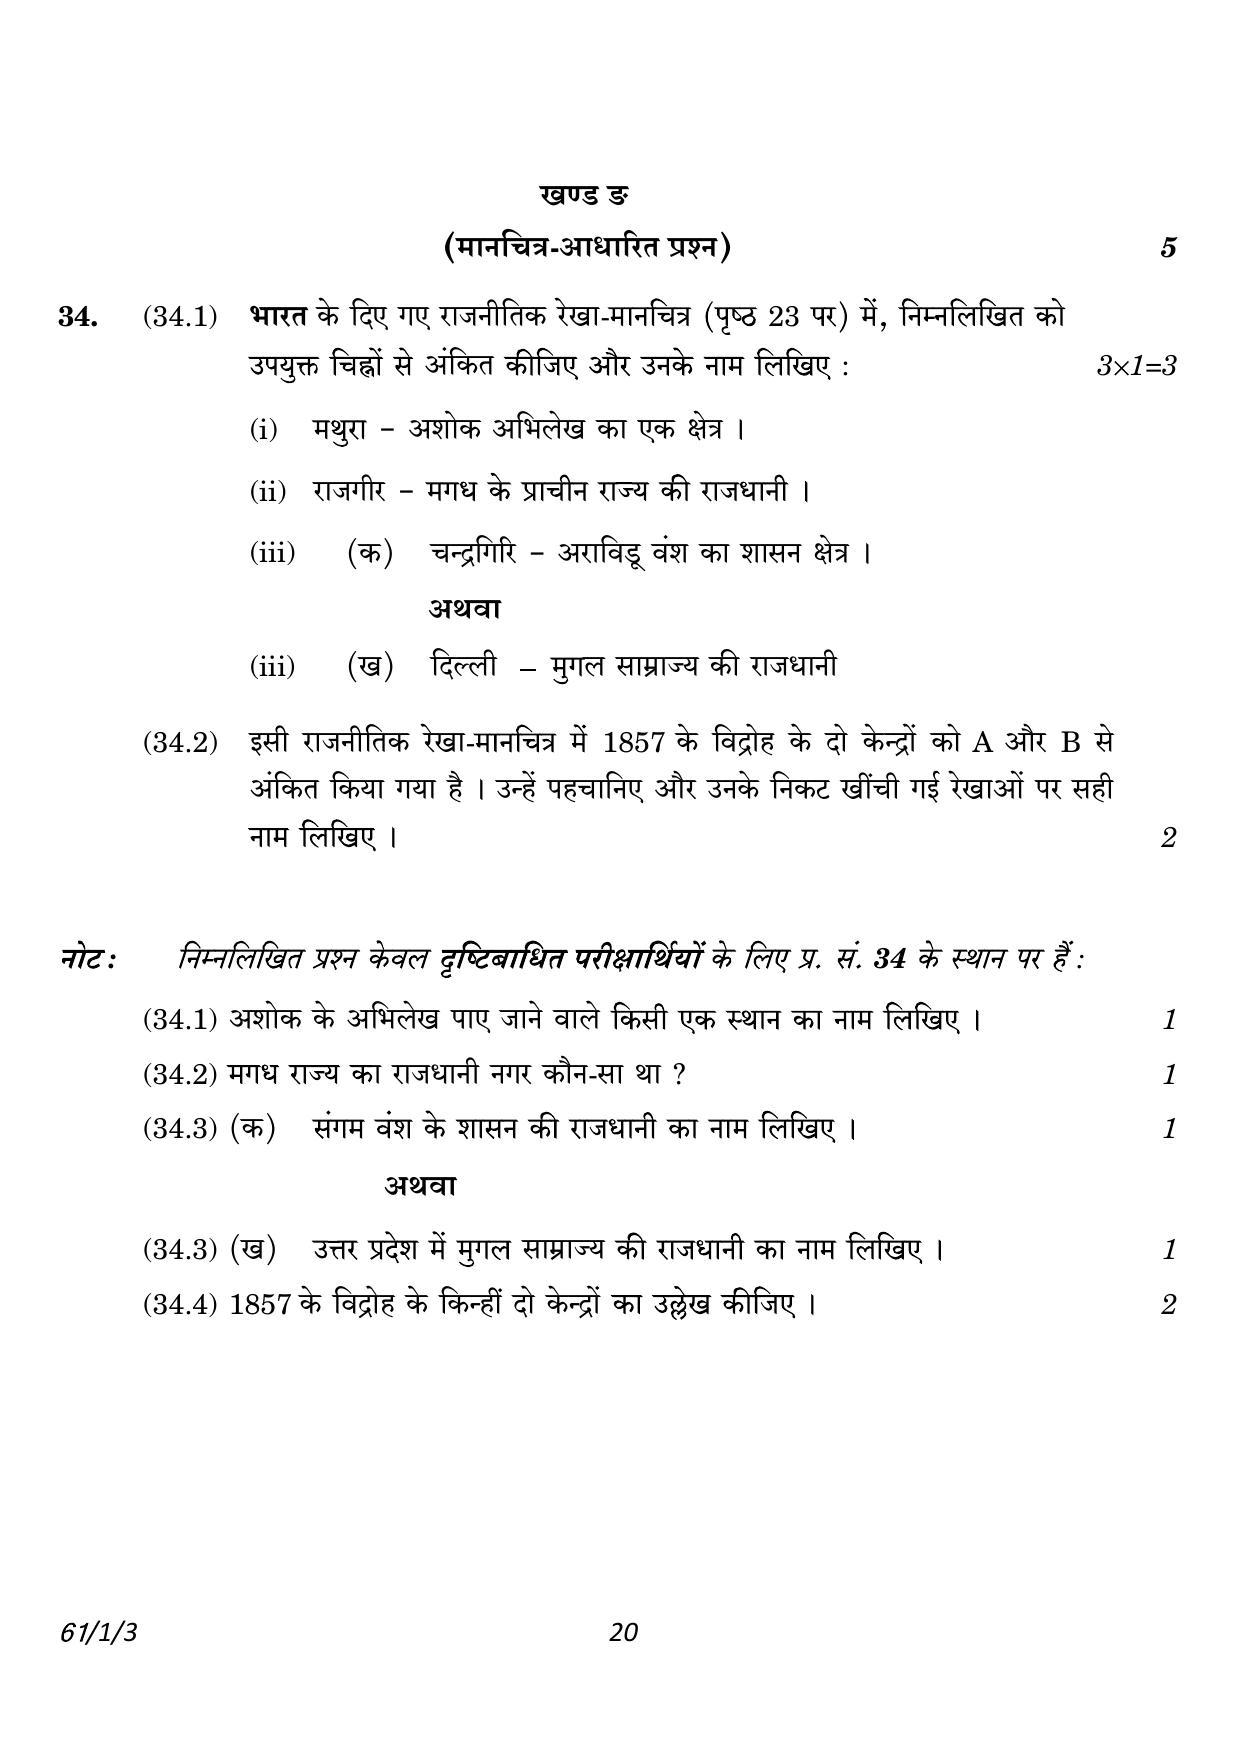 CBSE Class 12 61-1-3 History 2023 Question Paper - Page 20